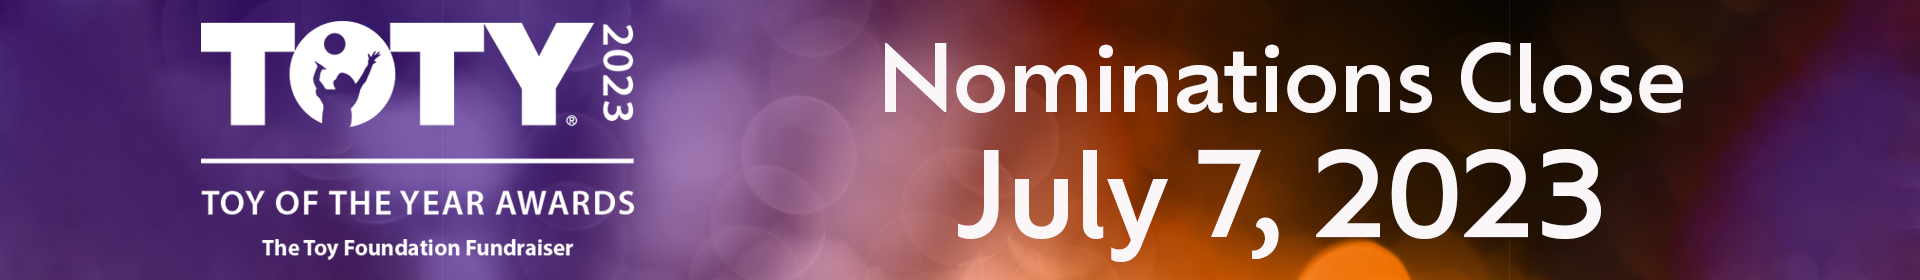 Toy of the Year Awards Nominations Close July 7, 2023